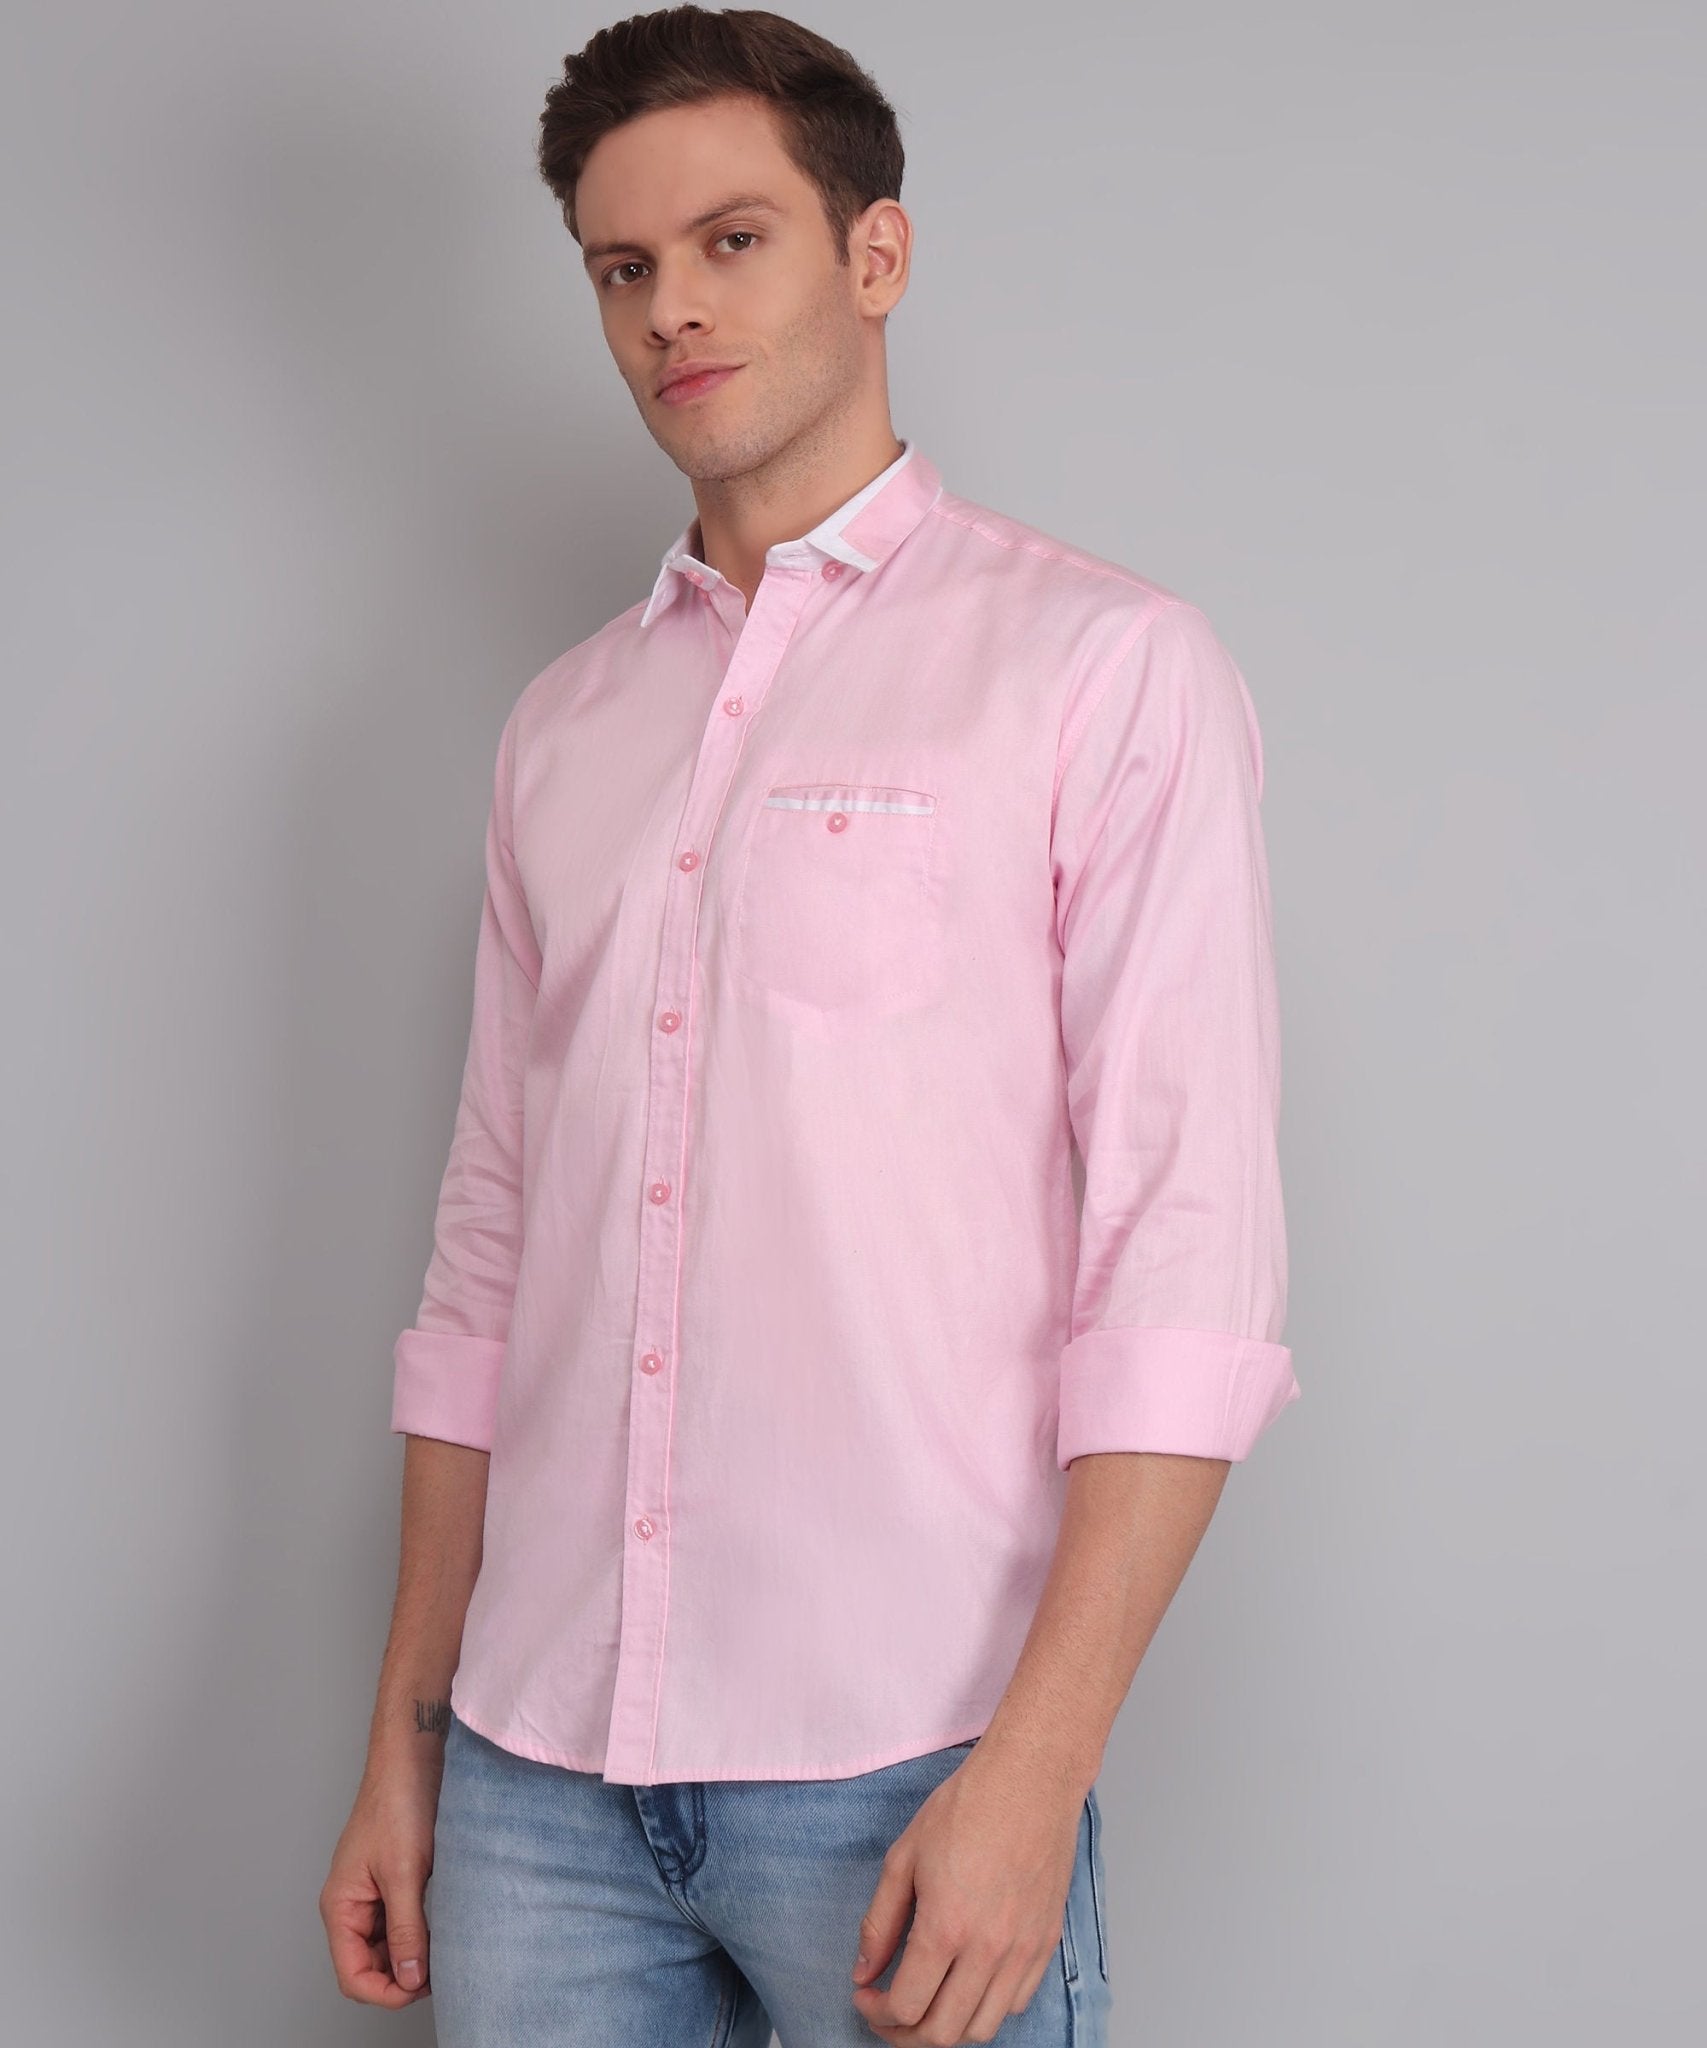 Fancy Fabulous TryBuy Premium Pink Solid Cotton Casual Shirt for Men - TryBuy® USA🇺🇸